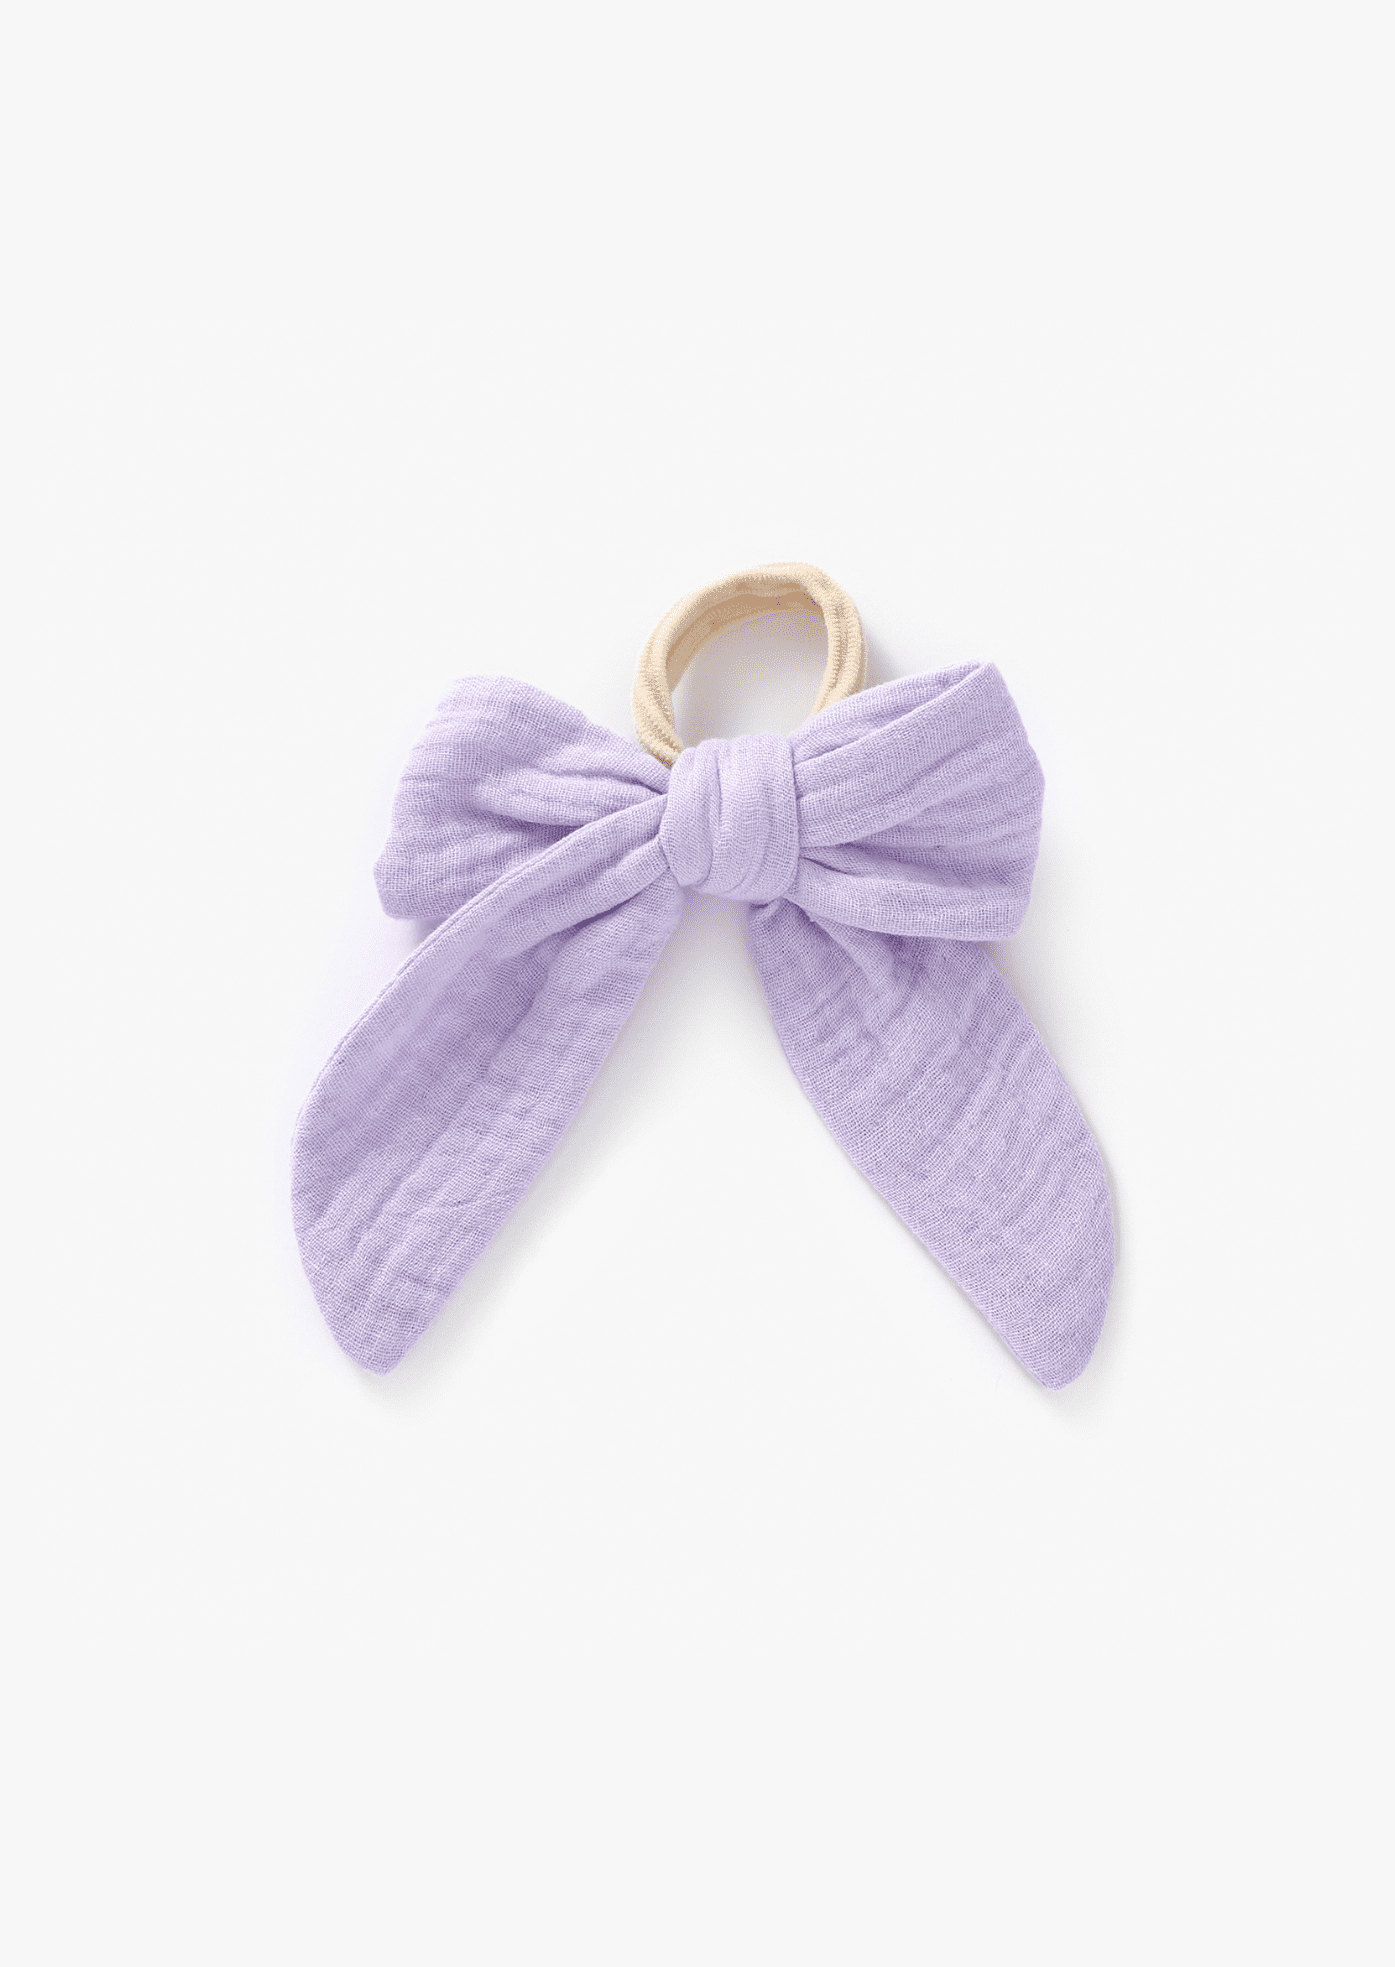 Fable Bow - Thistle - Mila & Co.